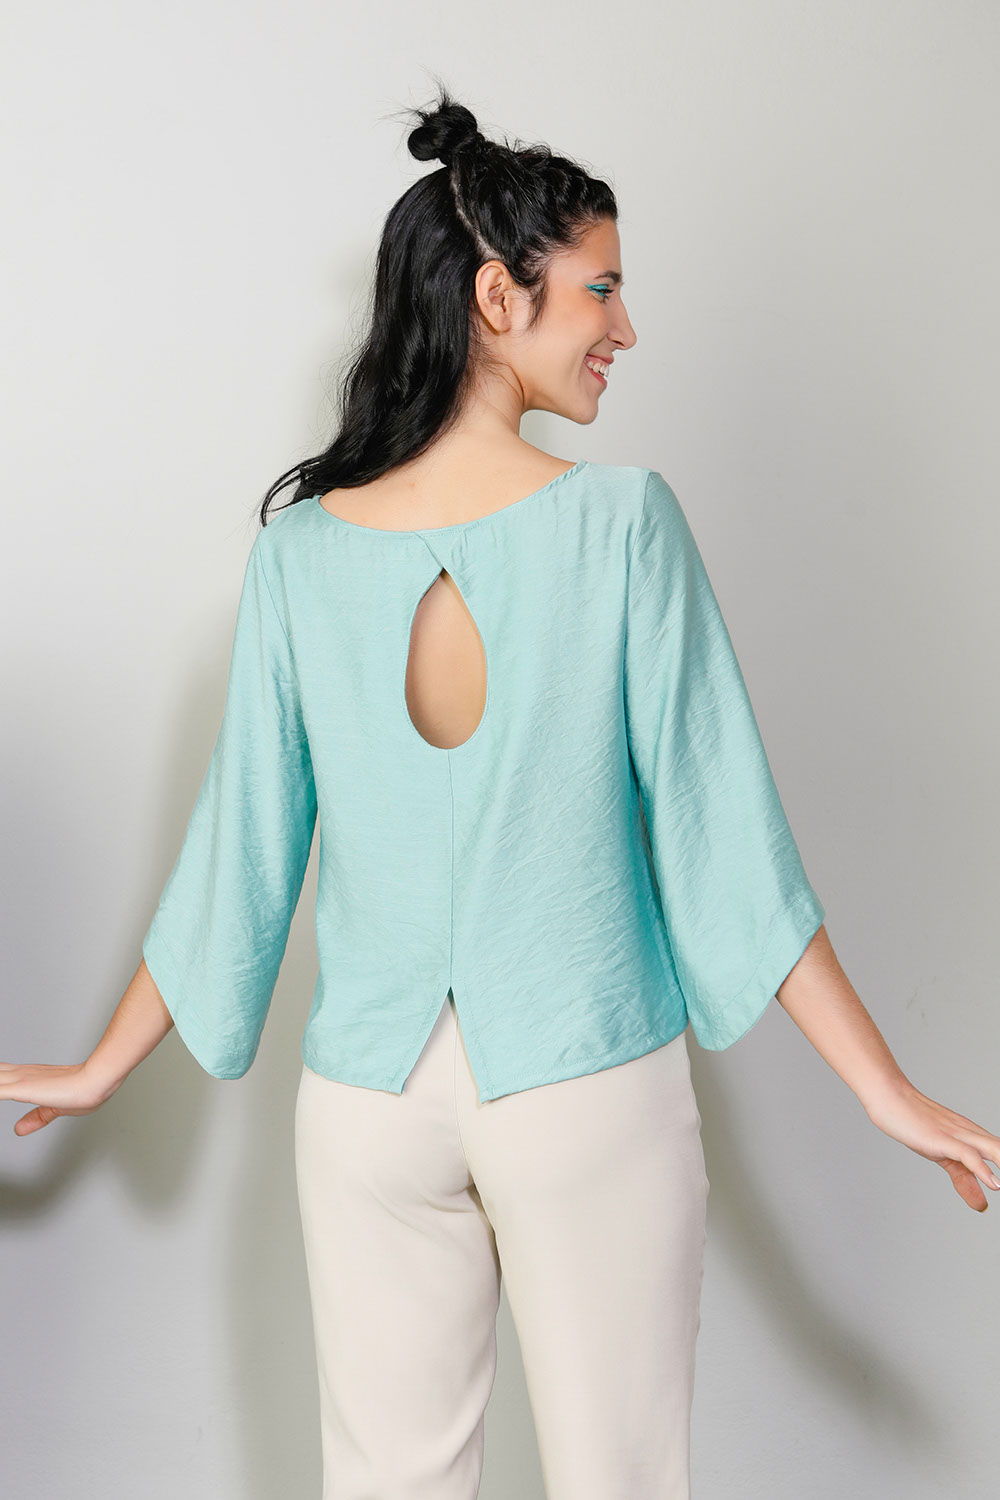 2. Blouse with bell sleeves teal 124226103